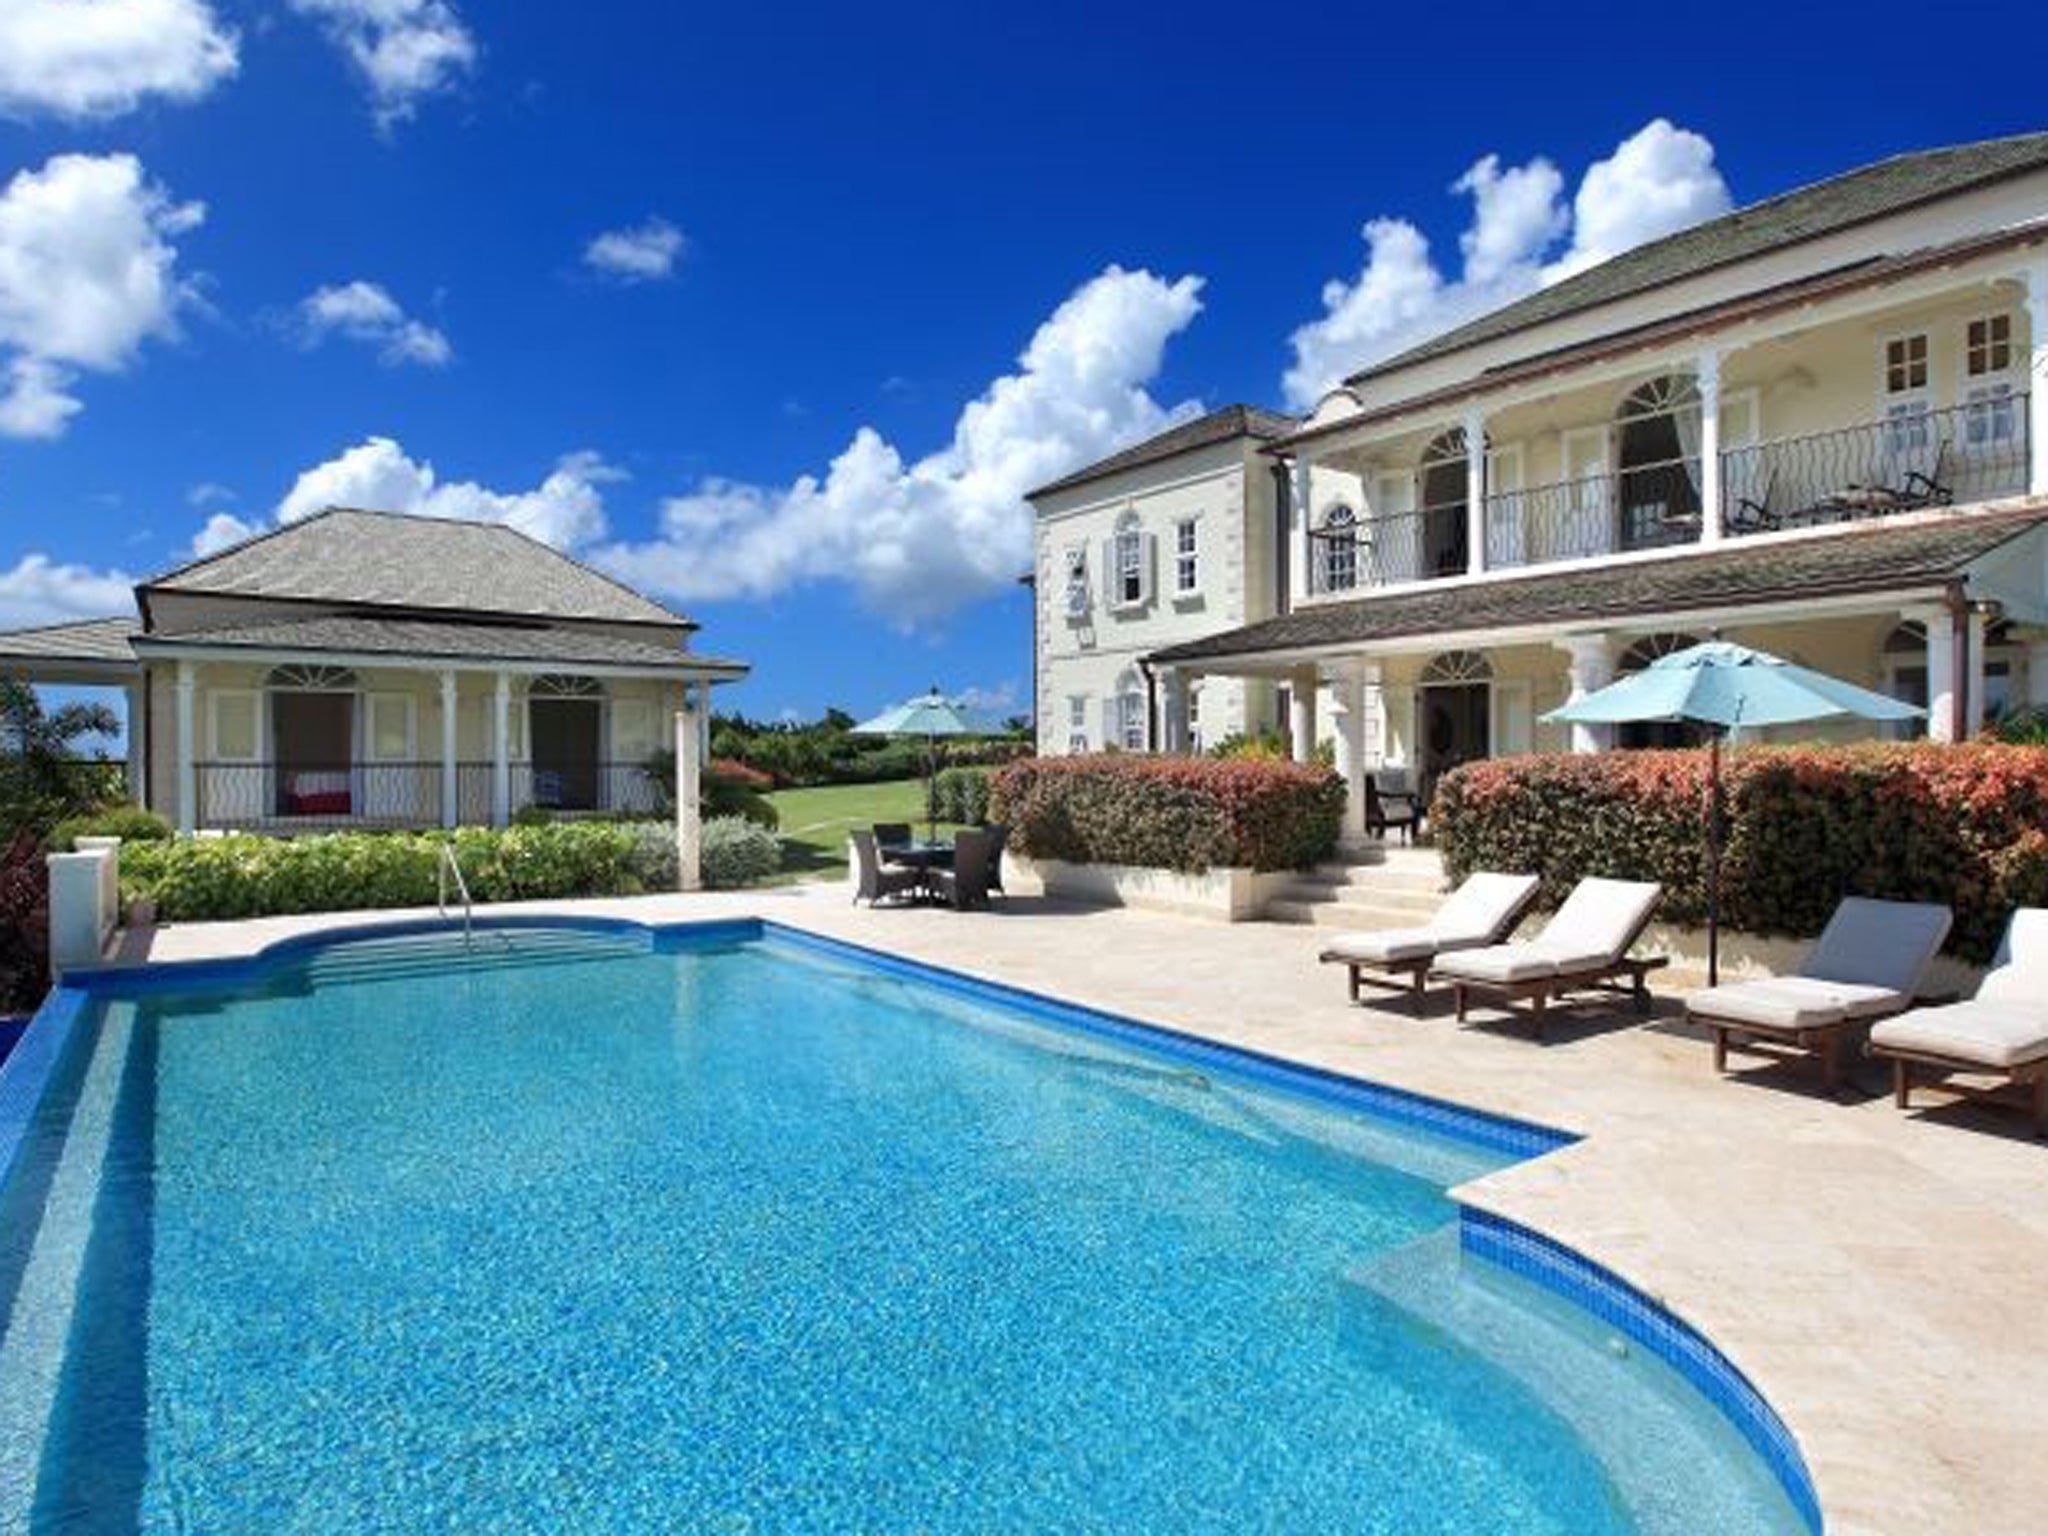 Villas on the Royal Westmoreland resort are custom built for purchasers